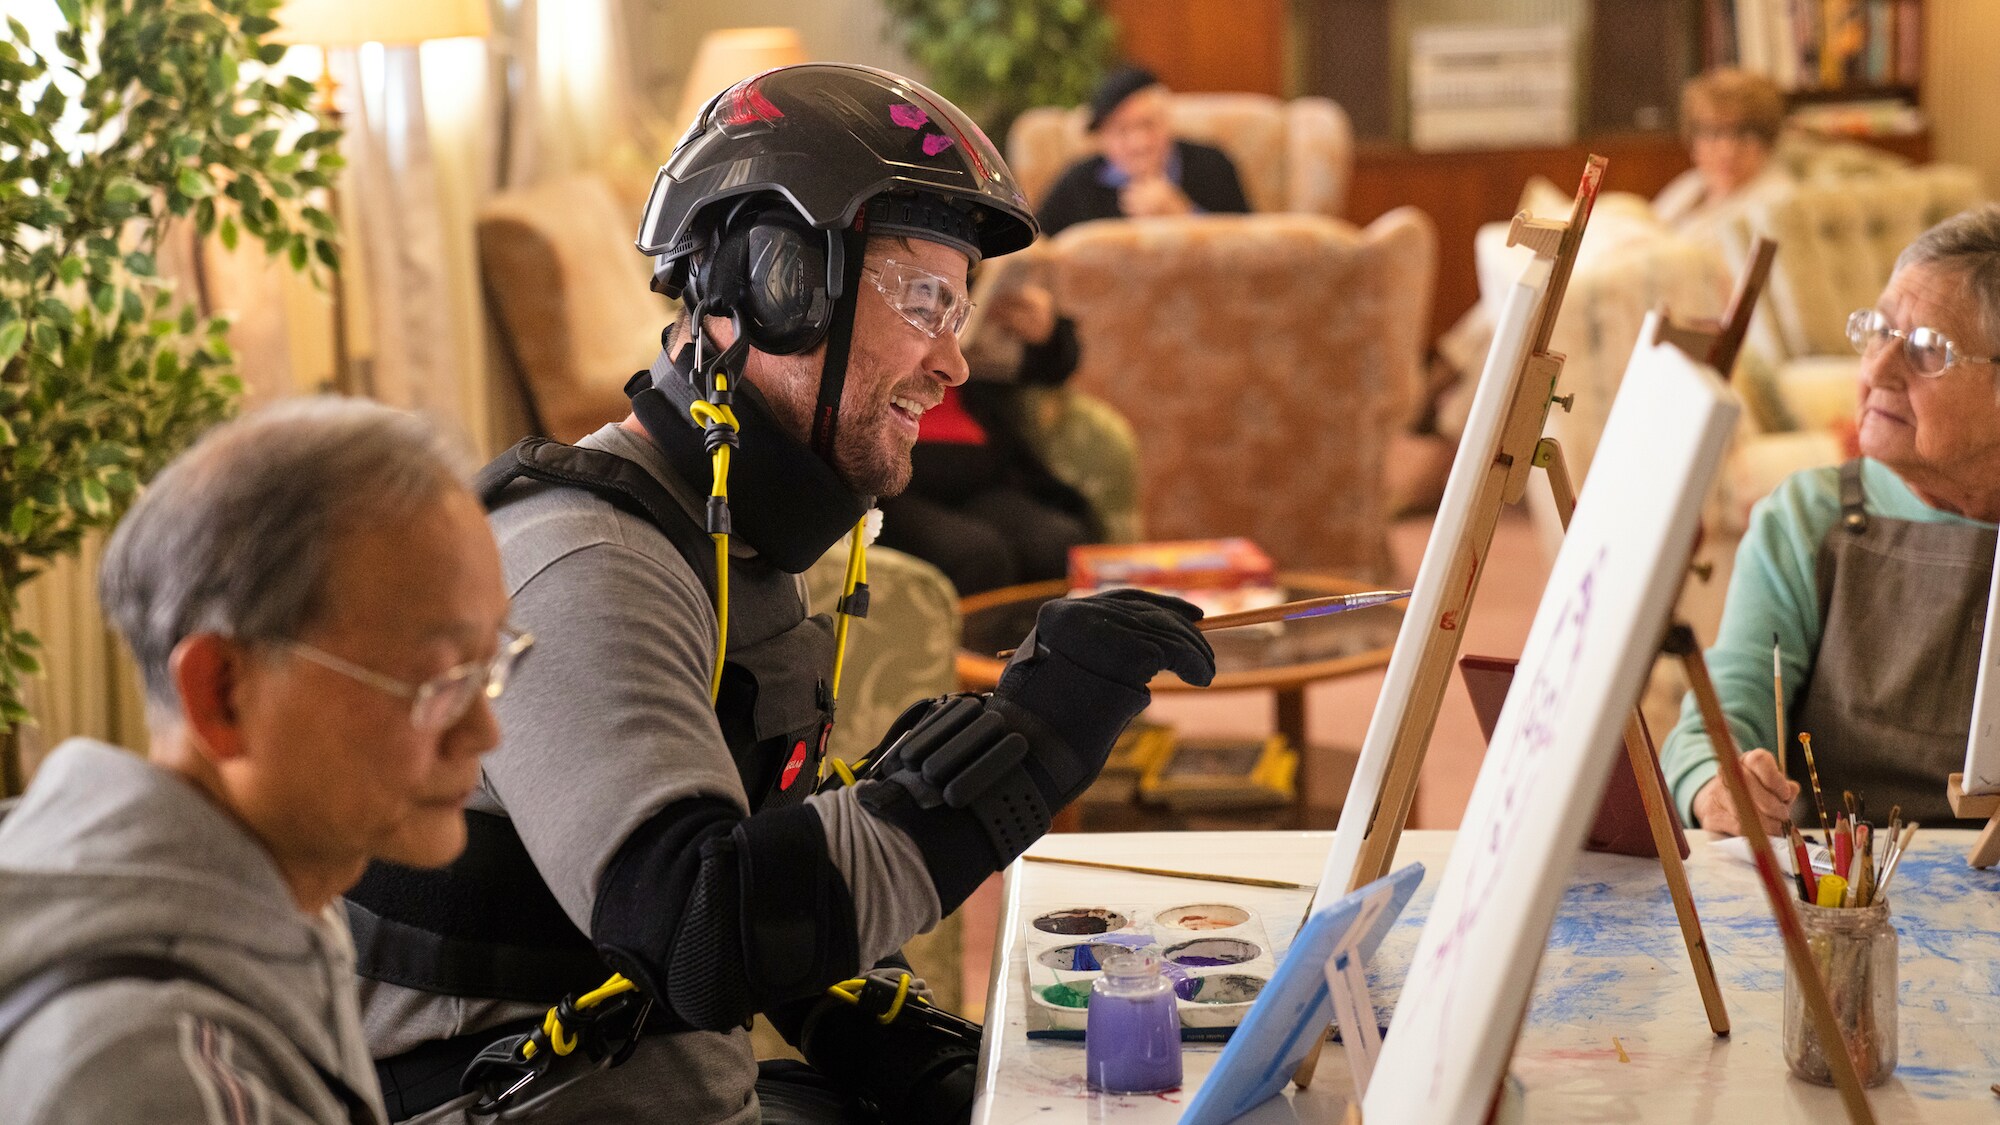 During the art class, Chris Hemsworth engages with other residents and learns from their experience of learning. Chris and others laugh at his painting. (National Geographic for Disney+/Craig Parry)